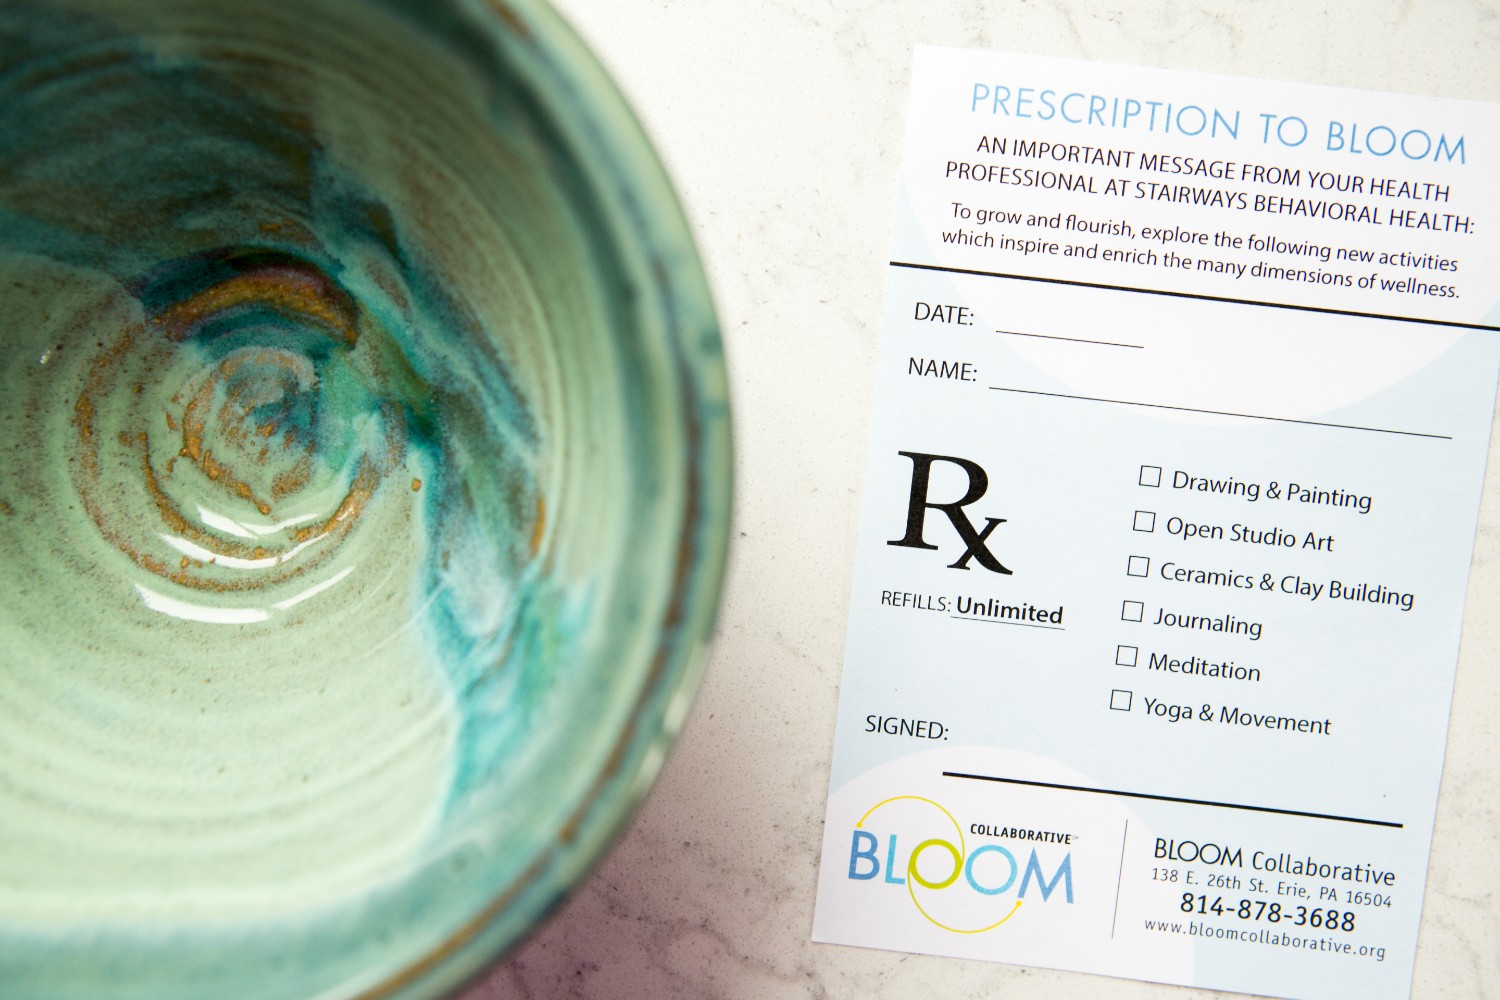 A prescription to bloom at BLOOM Collaborative in Erie, PA